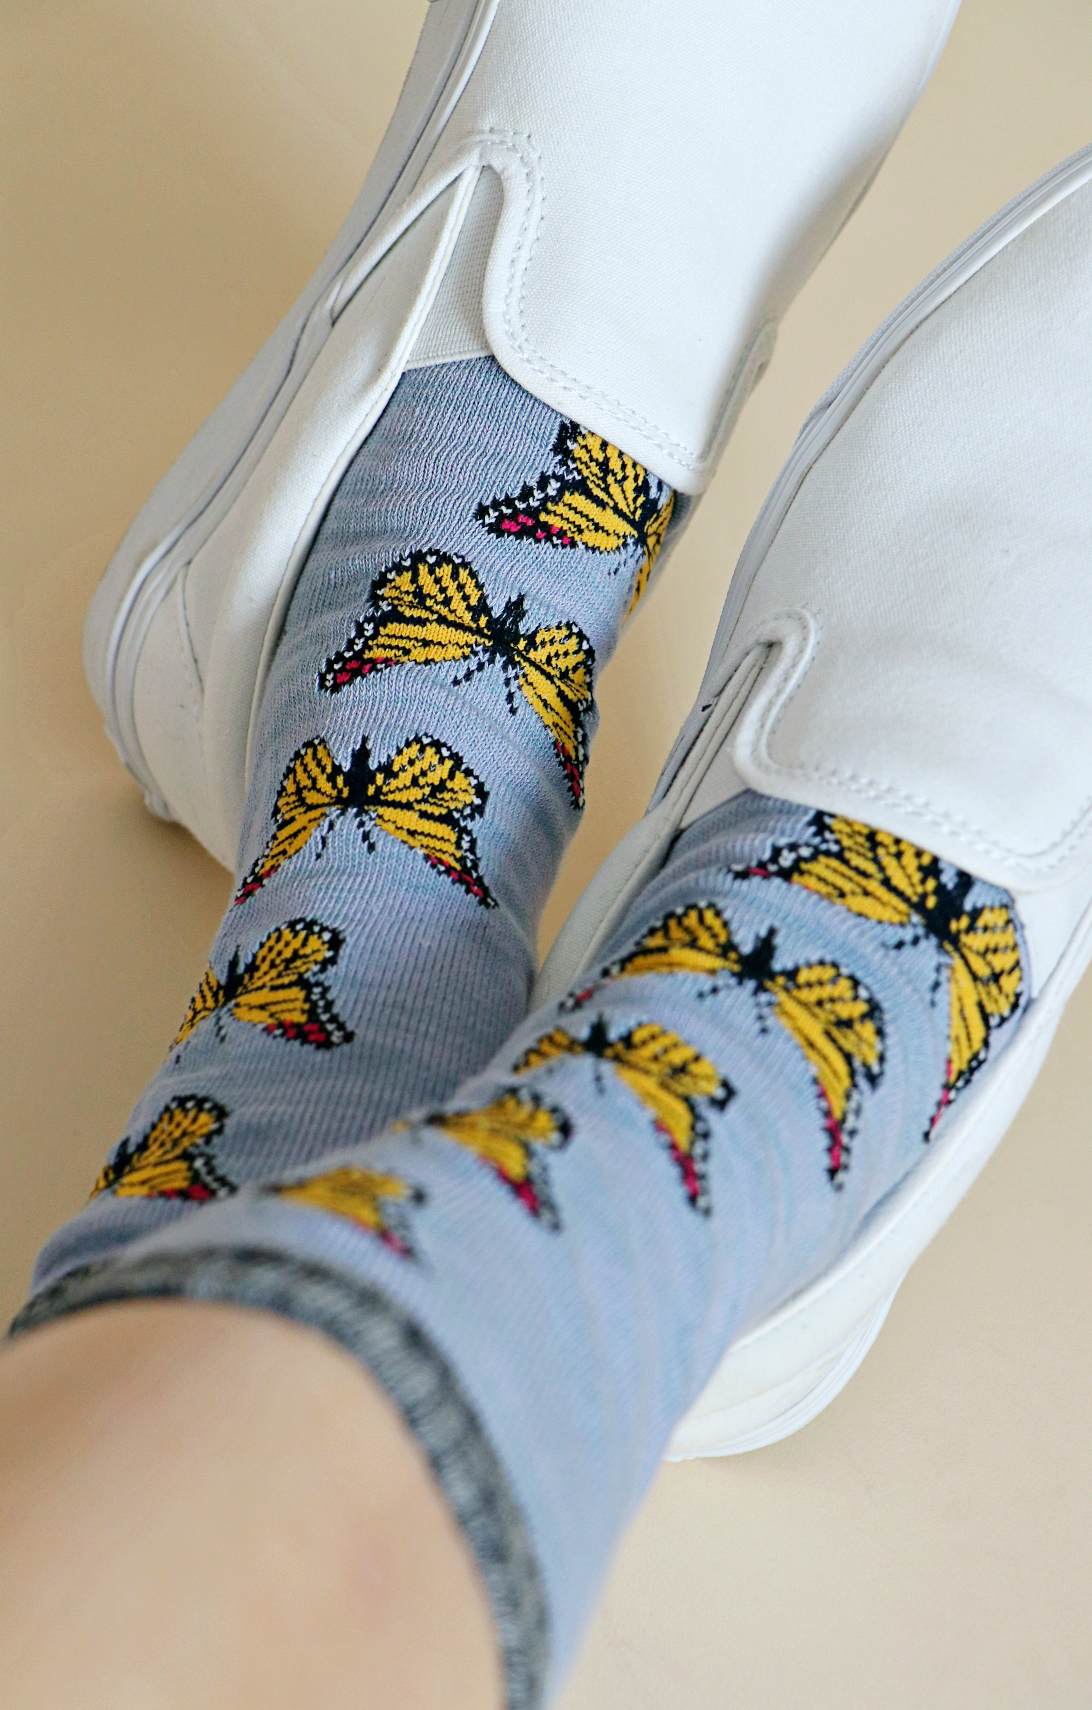 TABBISOCKS brand Replant Pairs "Monarch Butterfly" Organic Cotton Crew Socks with a butterfly pattern in Light Blue color with grayish green inserts at the mouth, toe and heel. The socks have a butterfly pattern on the mouth, toe, and heel in grayish green.